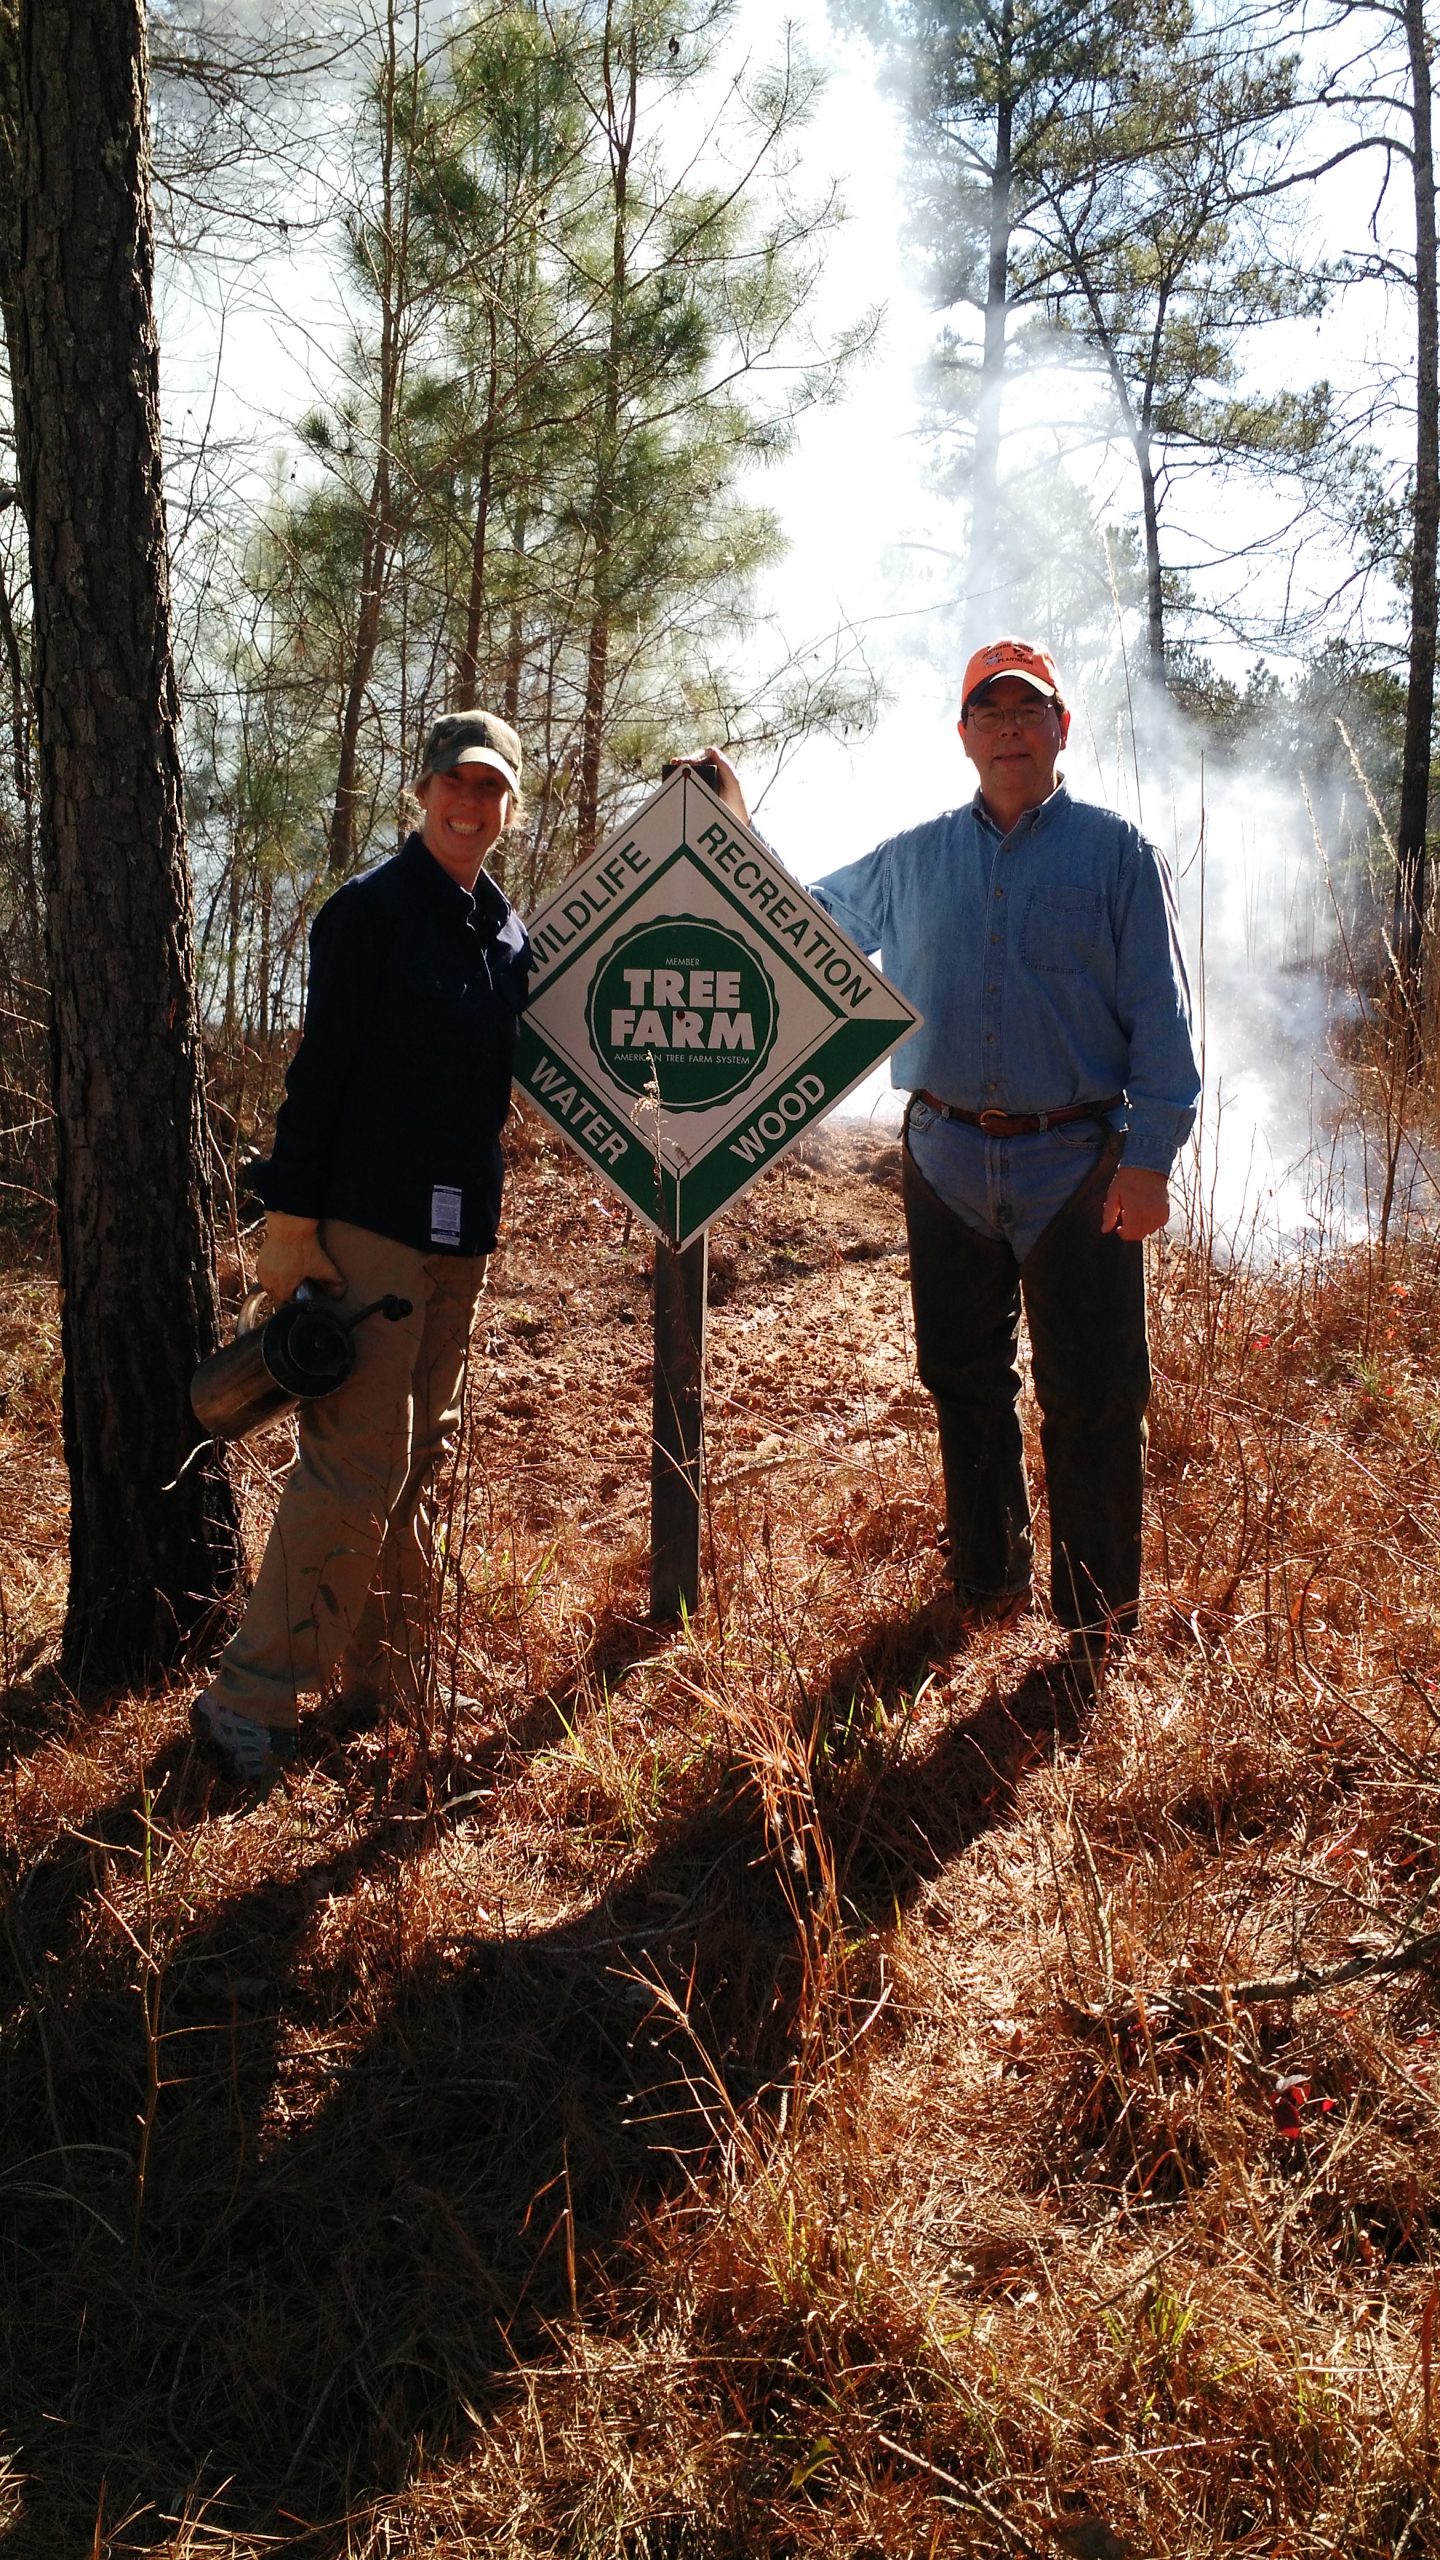 My uncle, Chuck Williams (R) and me (L) standing next to his American Tree Farm sign. Photo by Beth Williams